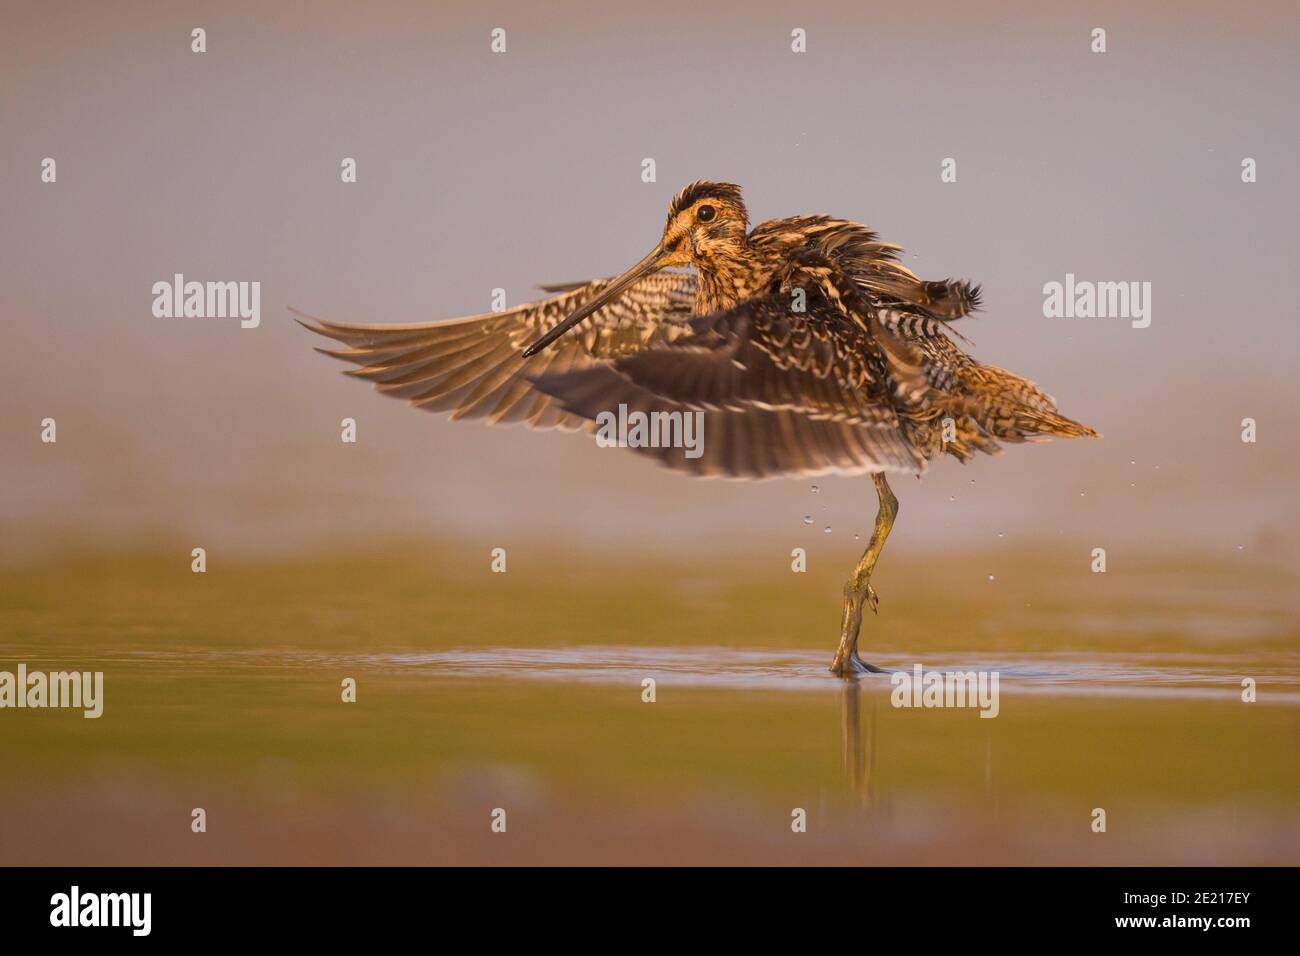 Common snipe (Gallinago gallinago), a shorebird found across North America, Eurasia and Northern Africa. It has the longest straight bill of all shore Stock Photo